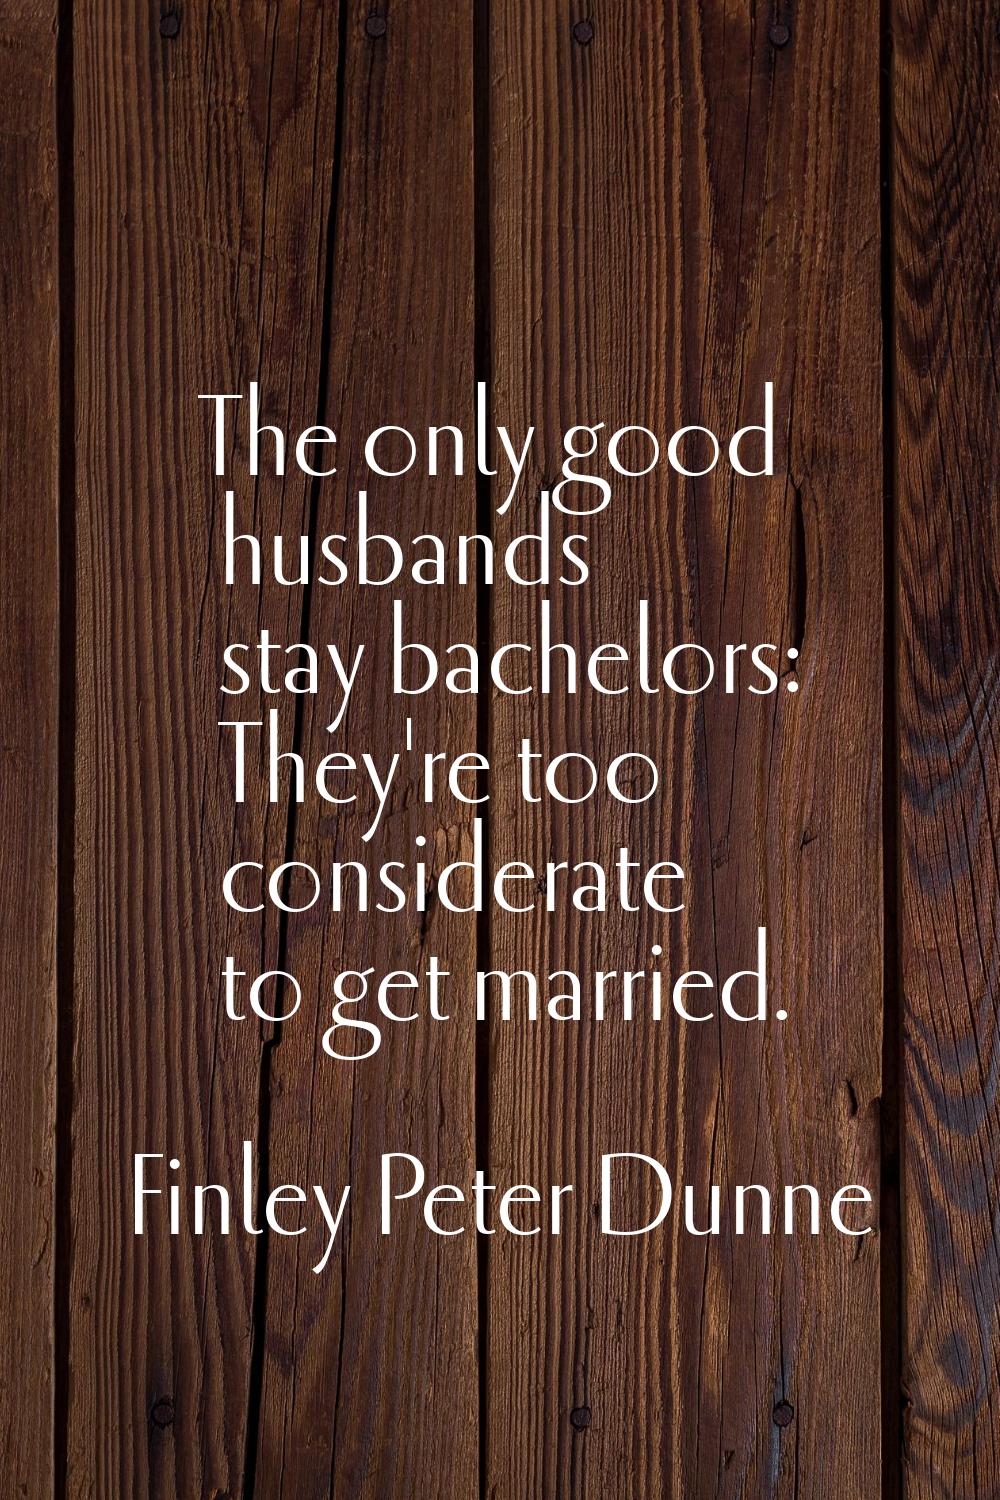 The only good husbands stay bachelors: They're too considerate to get married.